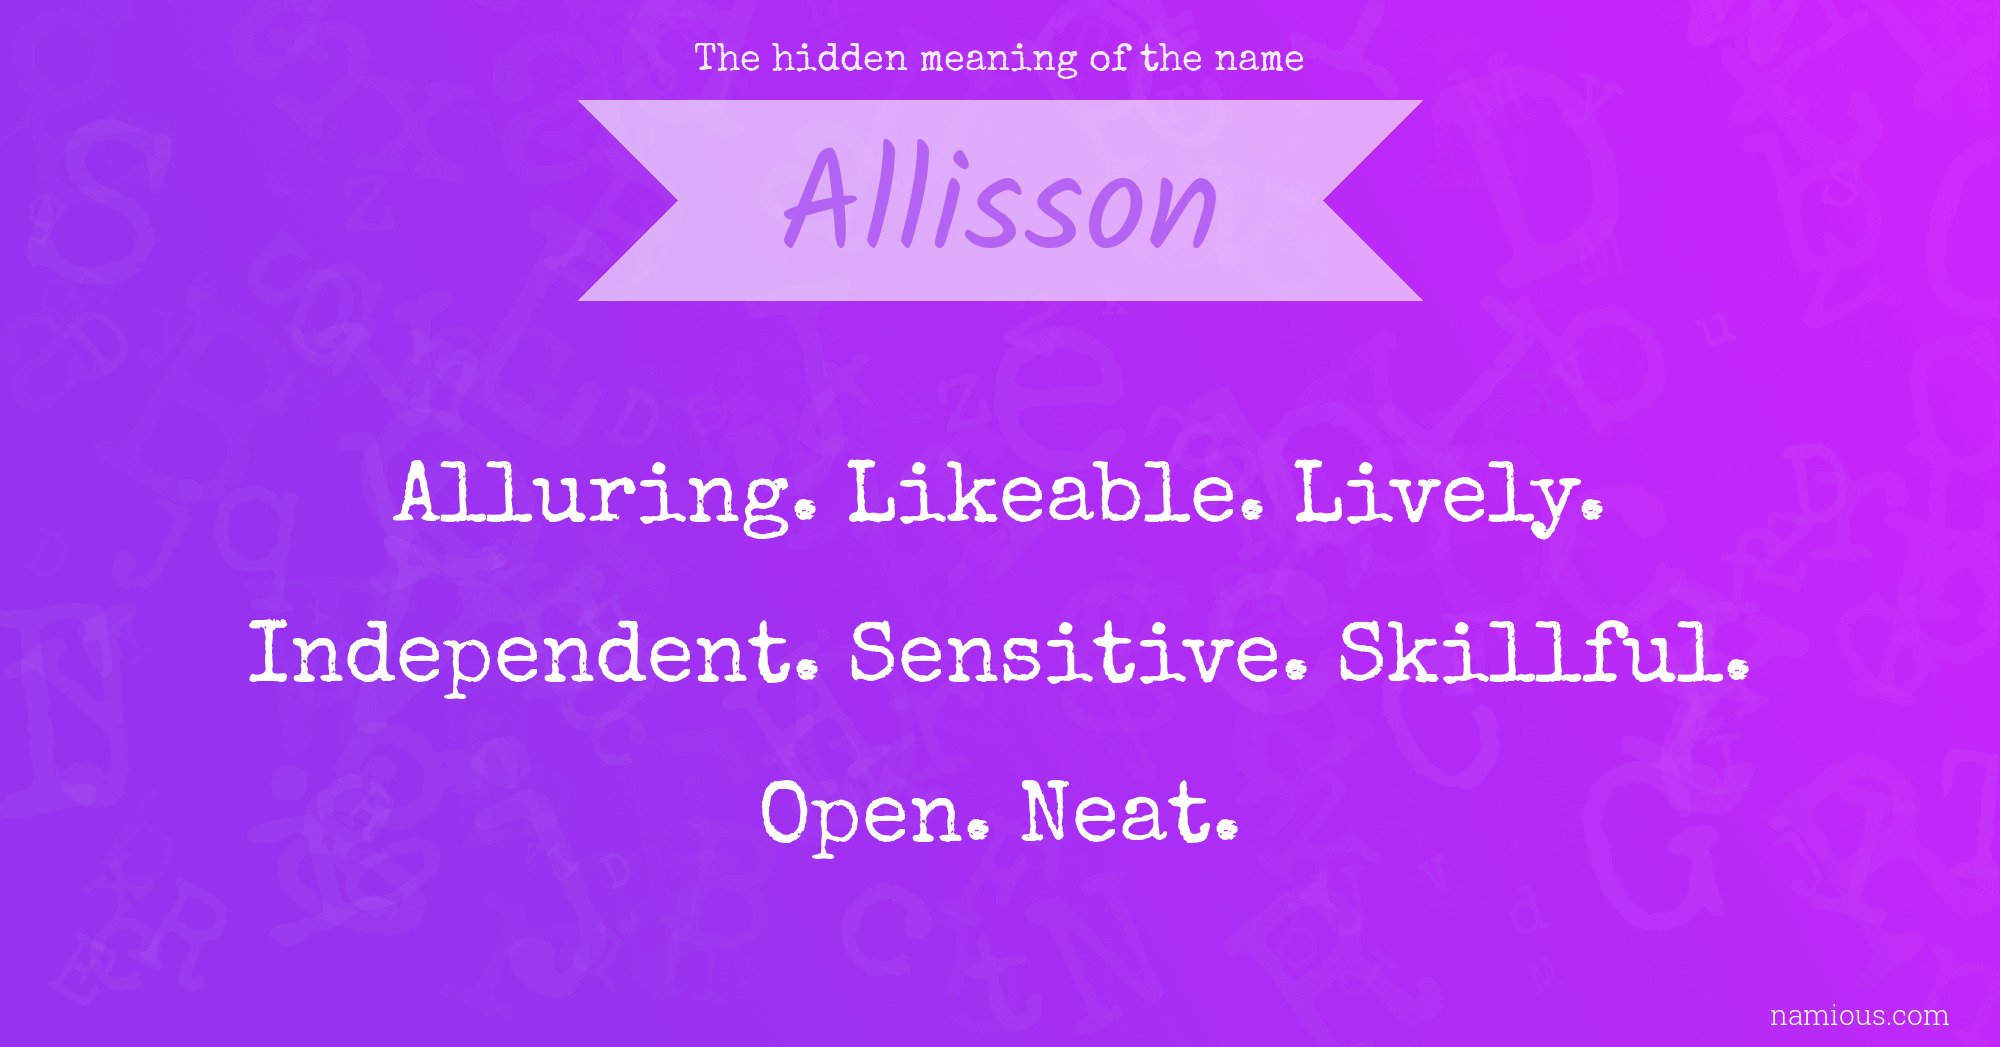 The hidden meaning of the name Allisson